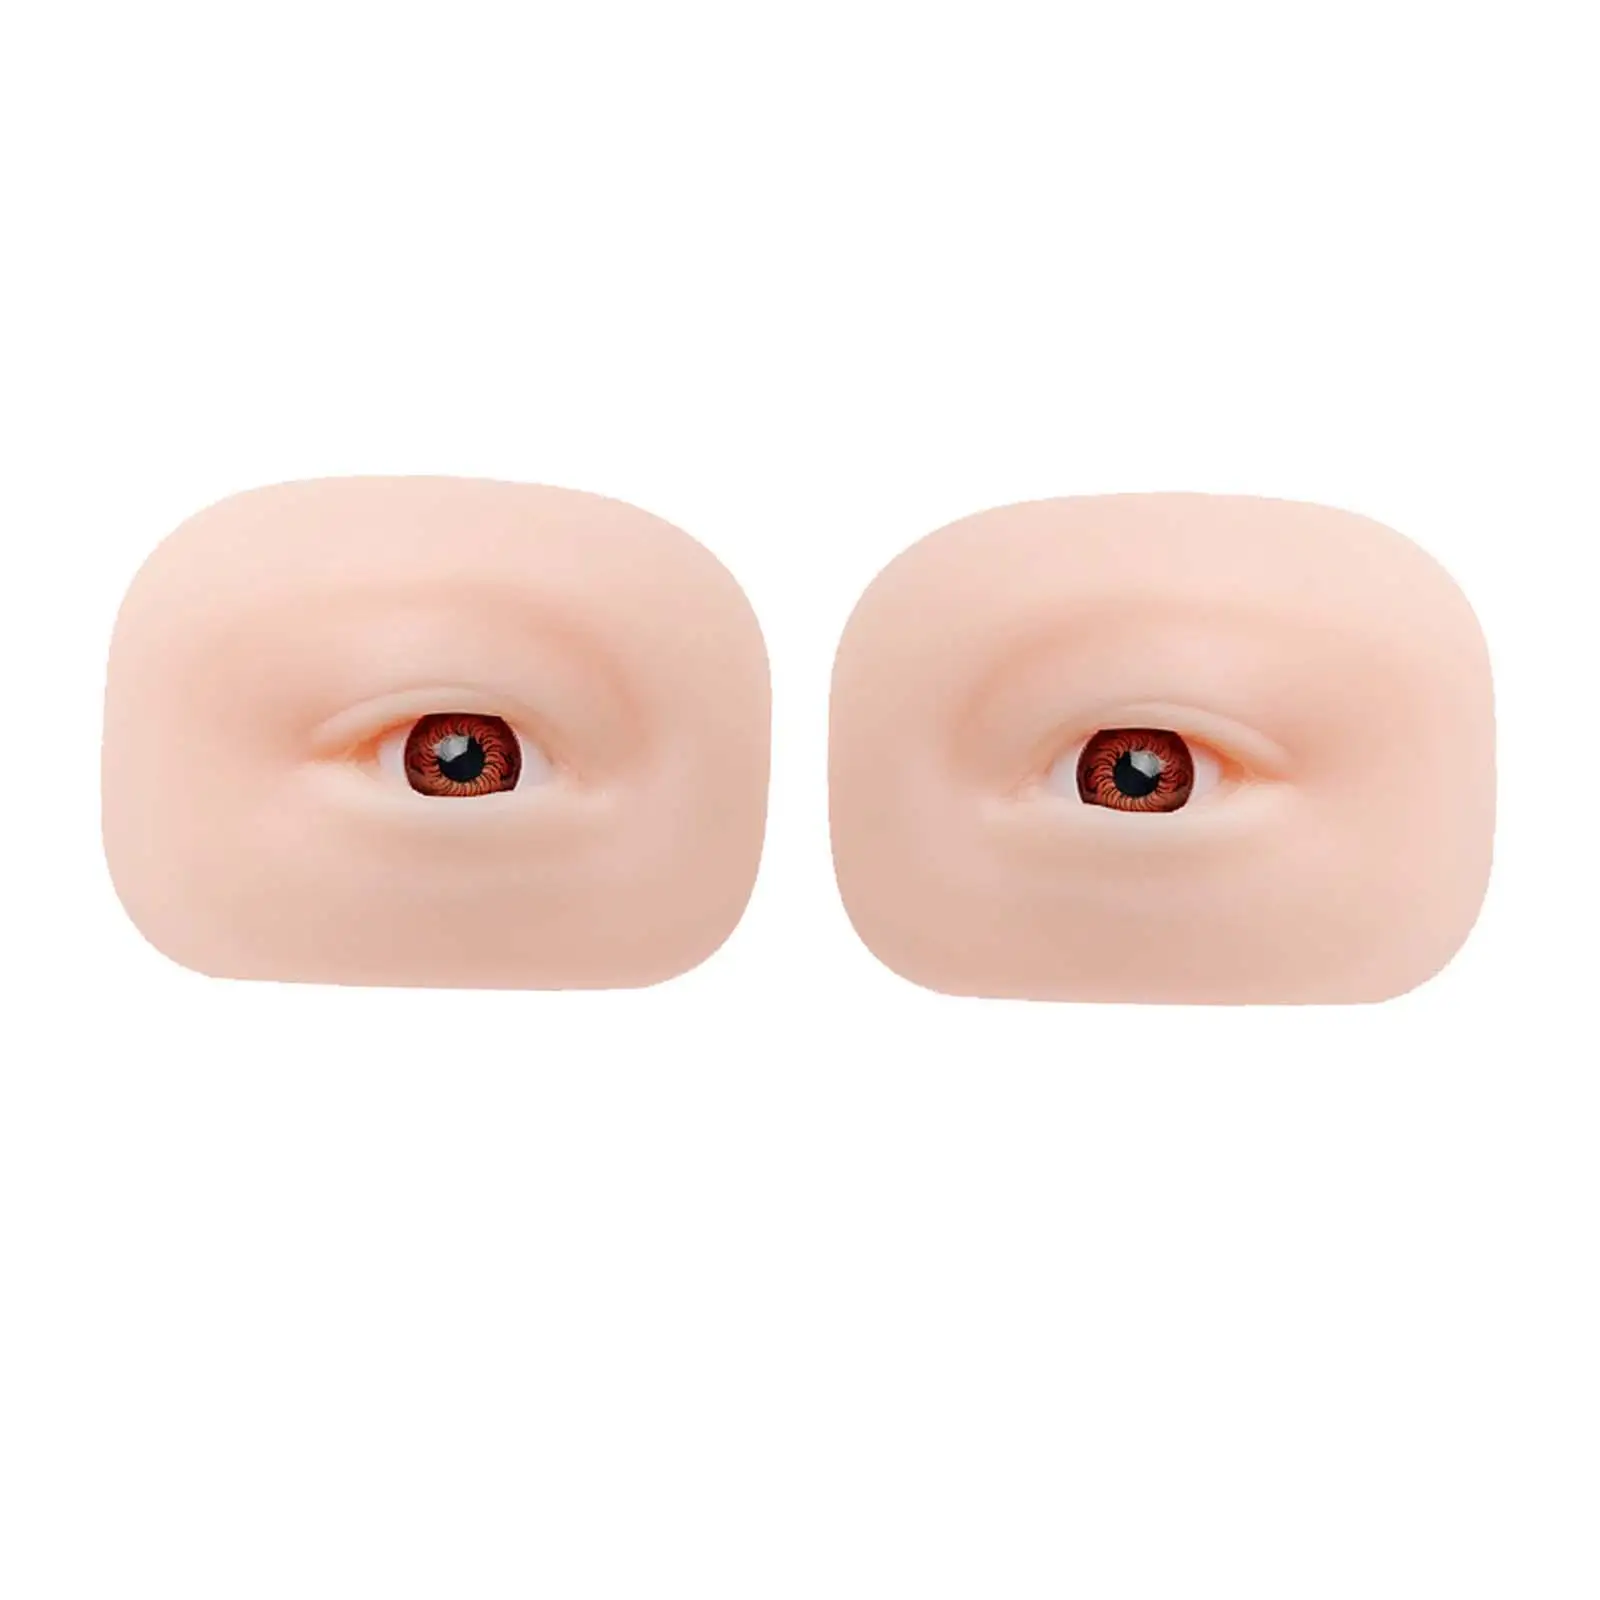 5D Silicone Eye Model Resuable for Starters Makeup Training Beauticians